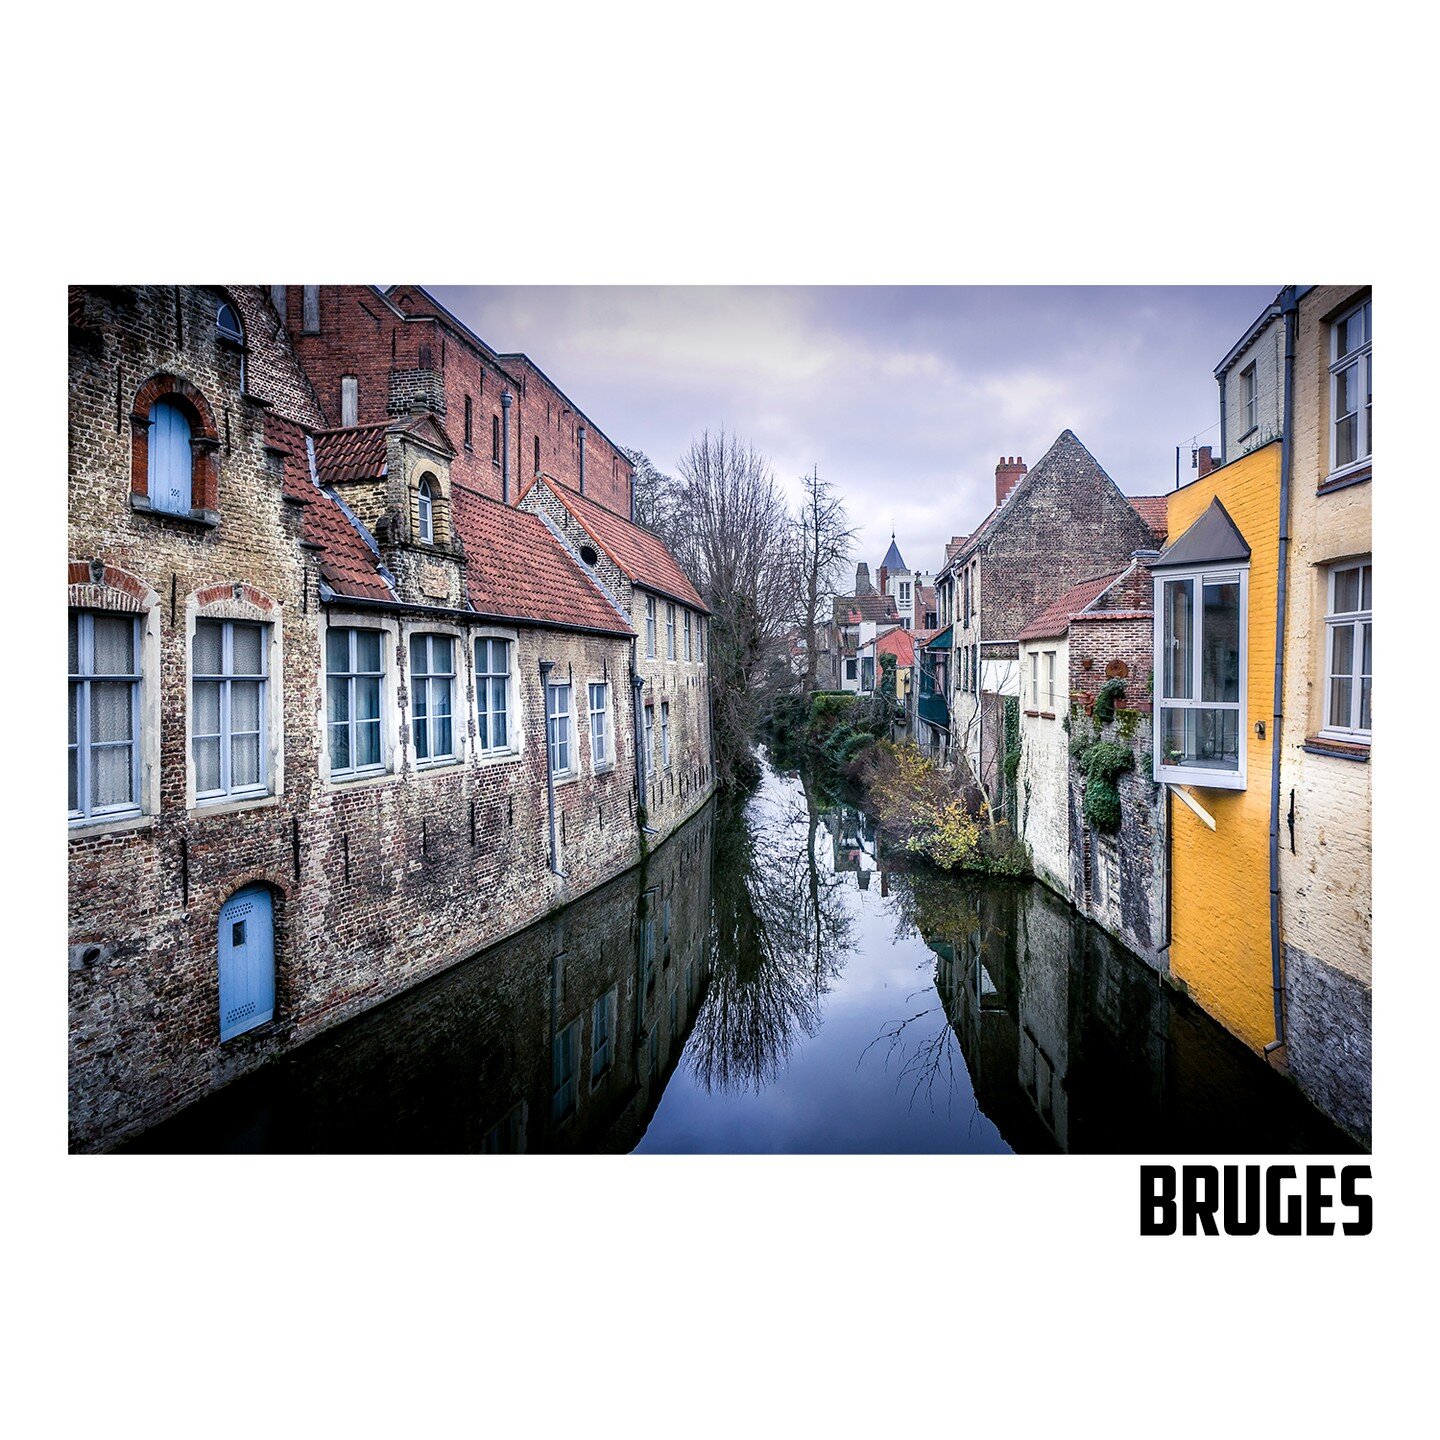 Bruges, Belgium.

#photography #travel #travelphotography